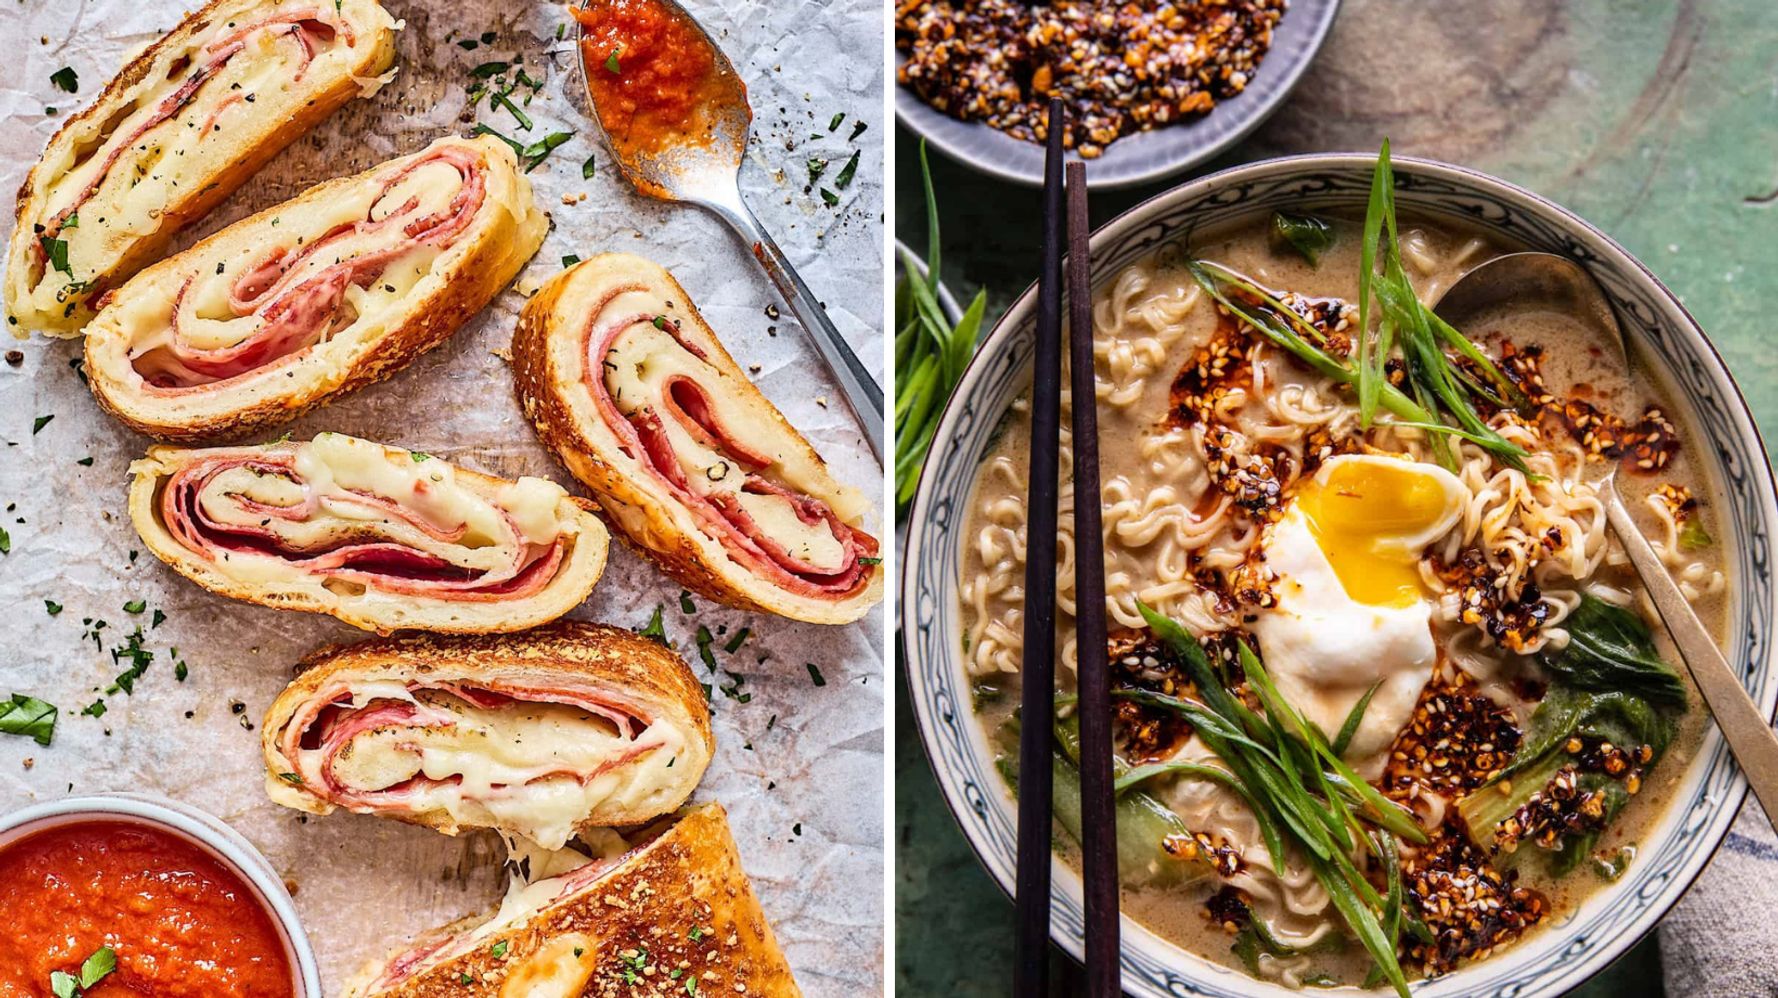 The 10 Most Popular Instagram Recipes From February 2022